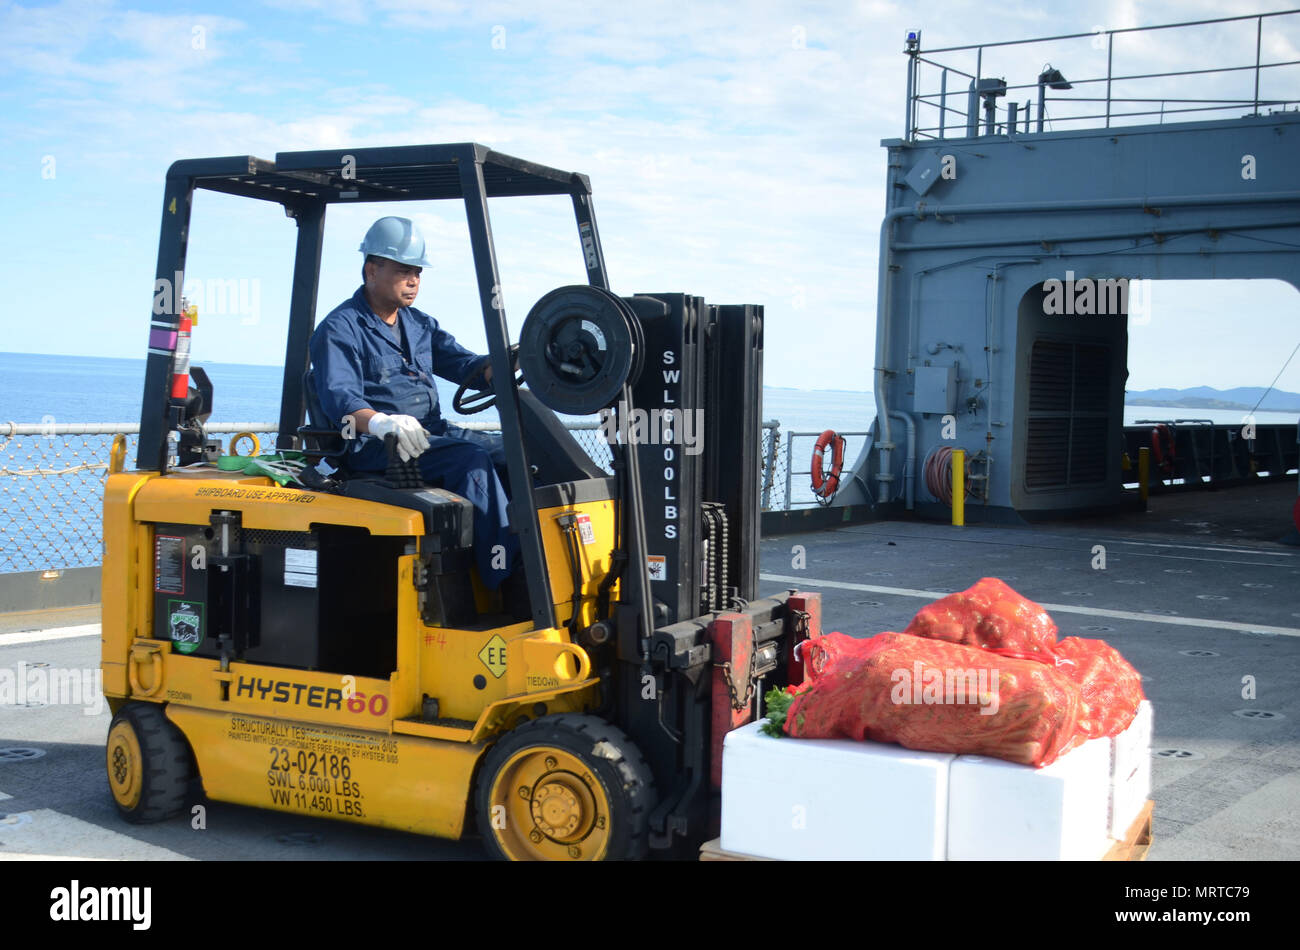 170706-N-WJ640-022 NOUMEA, New Caledonia (July 06, 2017) Nito Catunao, Boatswains Mate onboard USNS Sacagawea (T-AKE 2), operates a forklift during stores onload off shore Noumea, New Caledonia in support of Koa Moana 17, July 6. Koa Moana 17 is designed to improve theater security, and conduct law enforcement and infantry training in the Pacific region in order to enhance interoperability with partner nations. (U.S. Navy photo by Mass Communication Specialist 3rd Class Madailein Abbott) Stock Photo